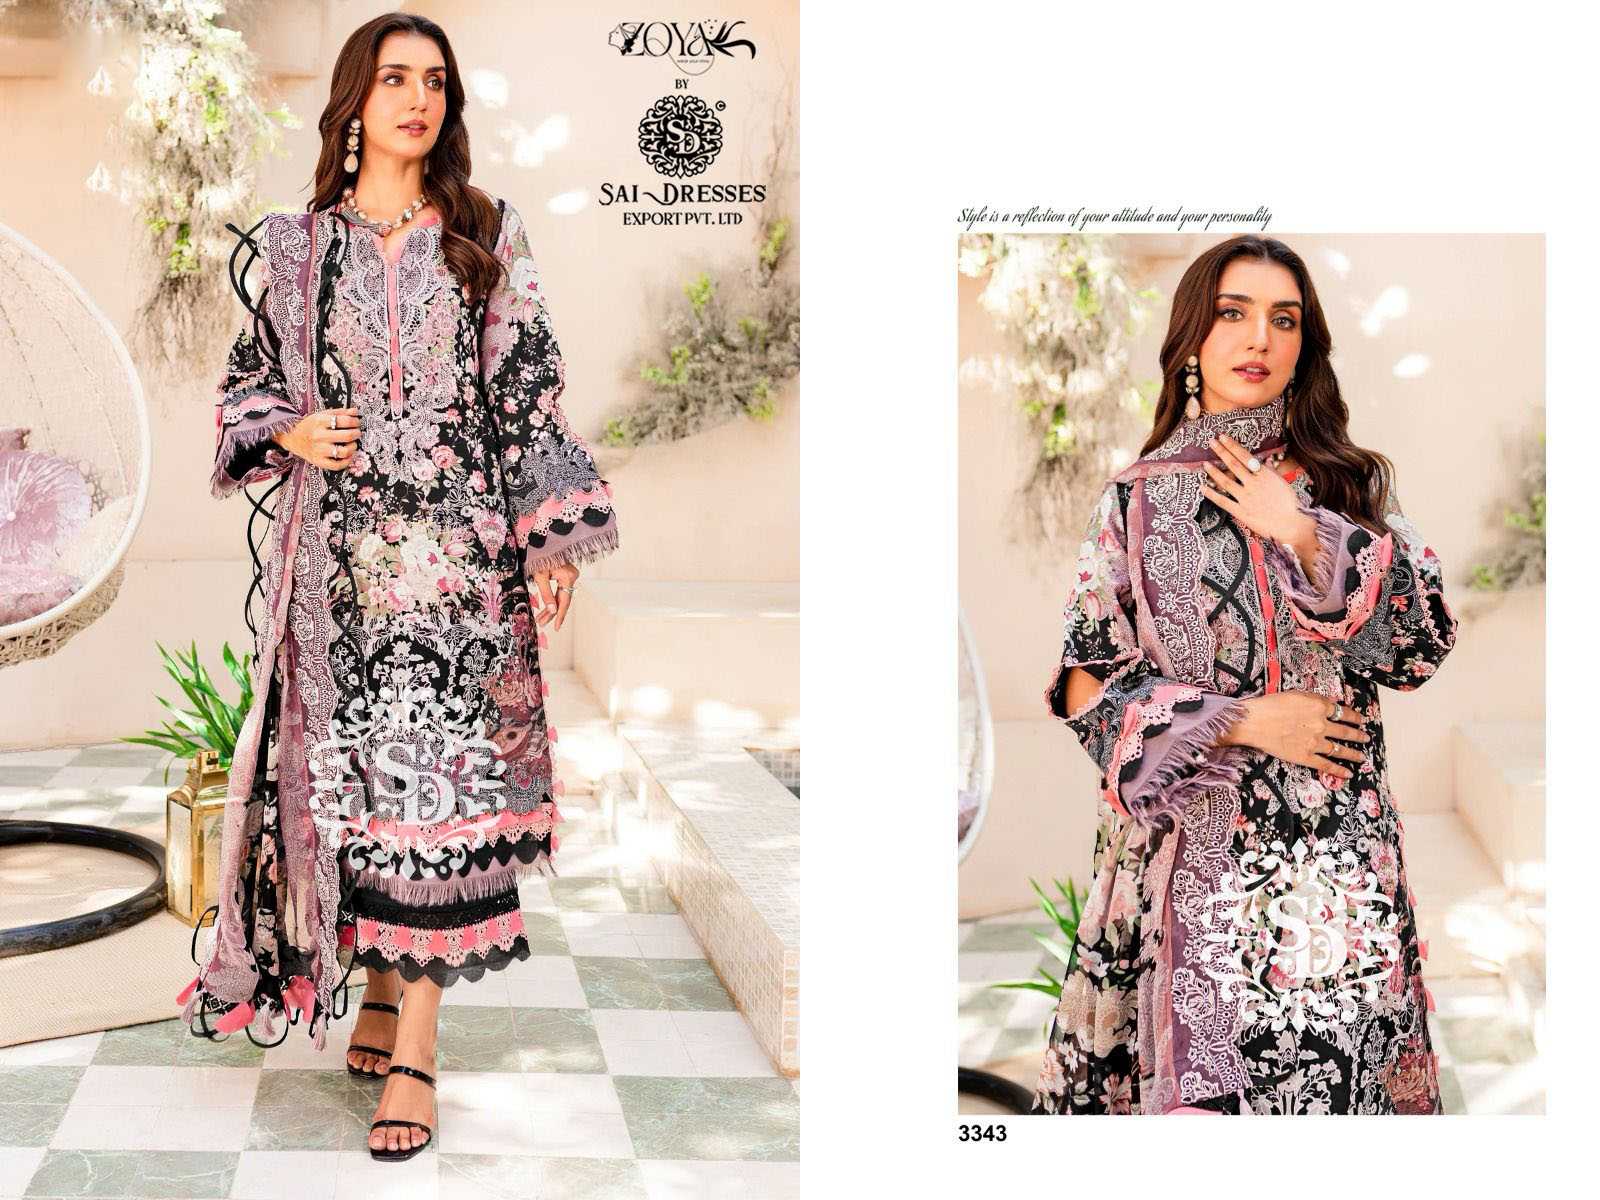 SAI DRESSES PRESENT NEEDLE WONDER PREMIUM PARTY WEAR PURE COTTON PATCH EMBROIDERED BEAUTIFUL PAKISTANI DESIGNER SALWAR SUITS IN WHOLESALE RATE IN SURAT